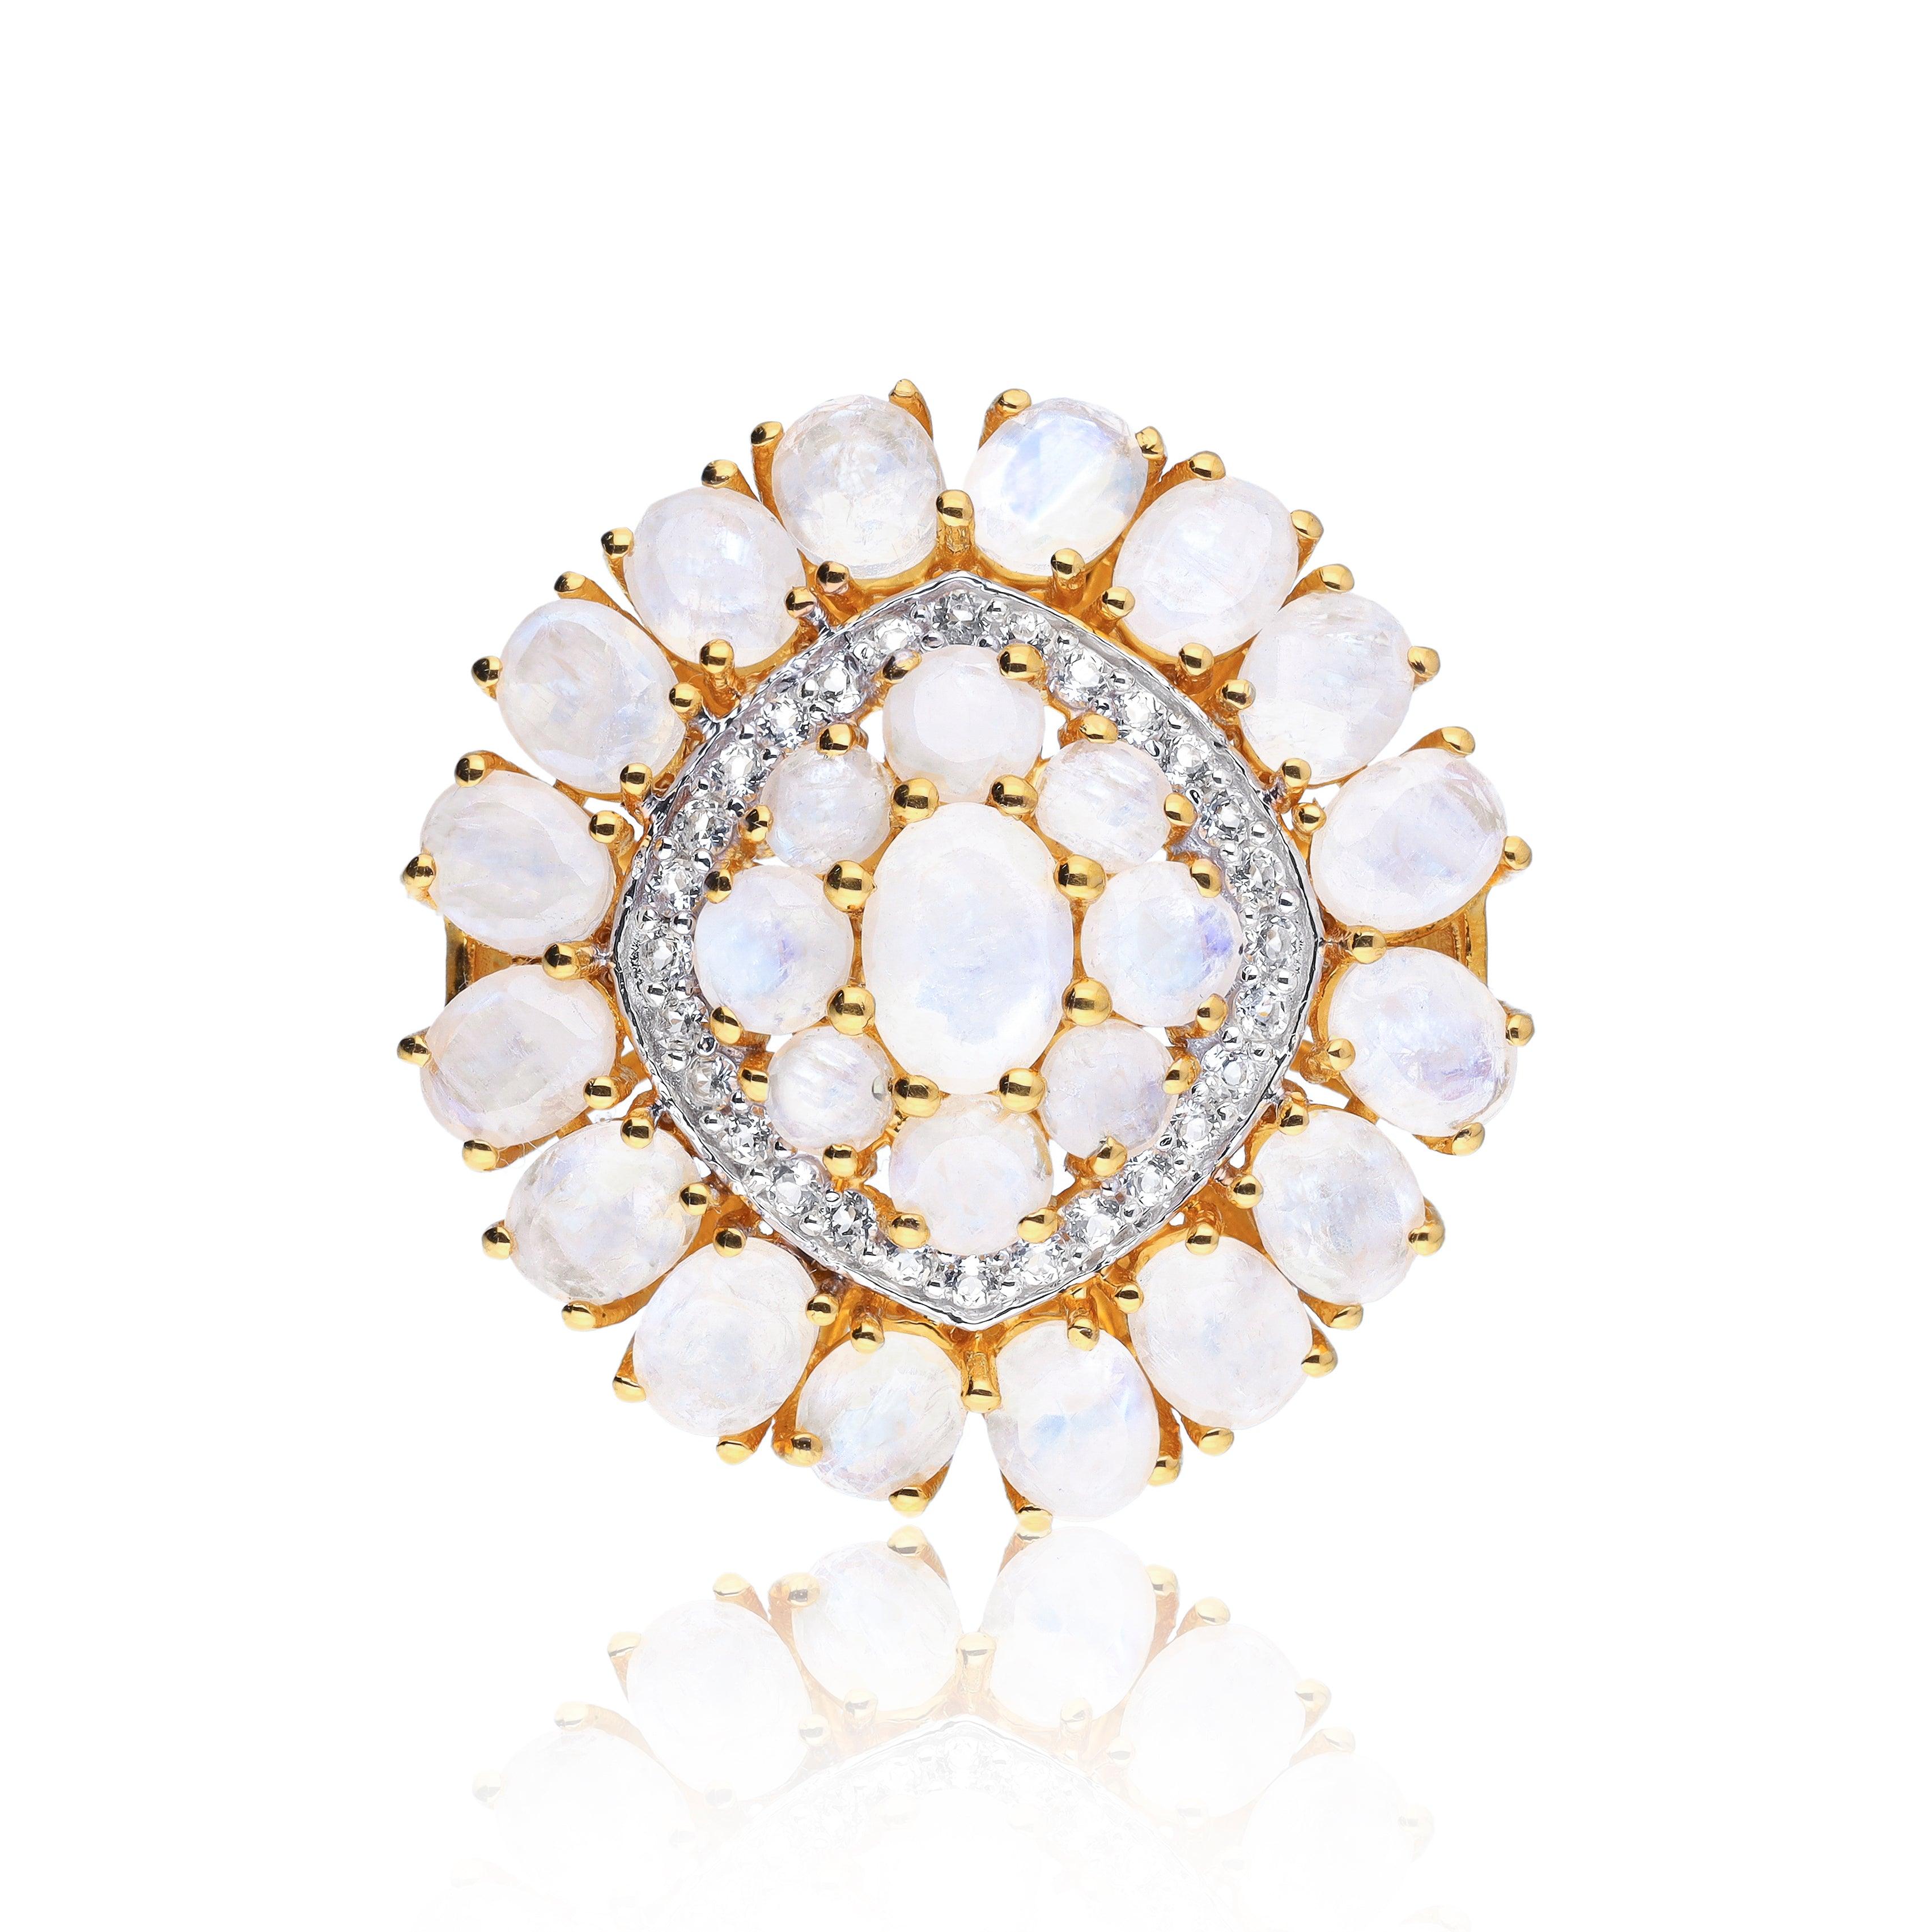 Moonstone White Topaz Yellow Gold Plated Over 925 Silver Cluster Ring Jewelry - YoTreasure